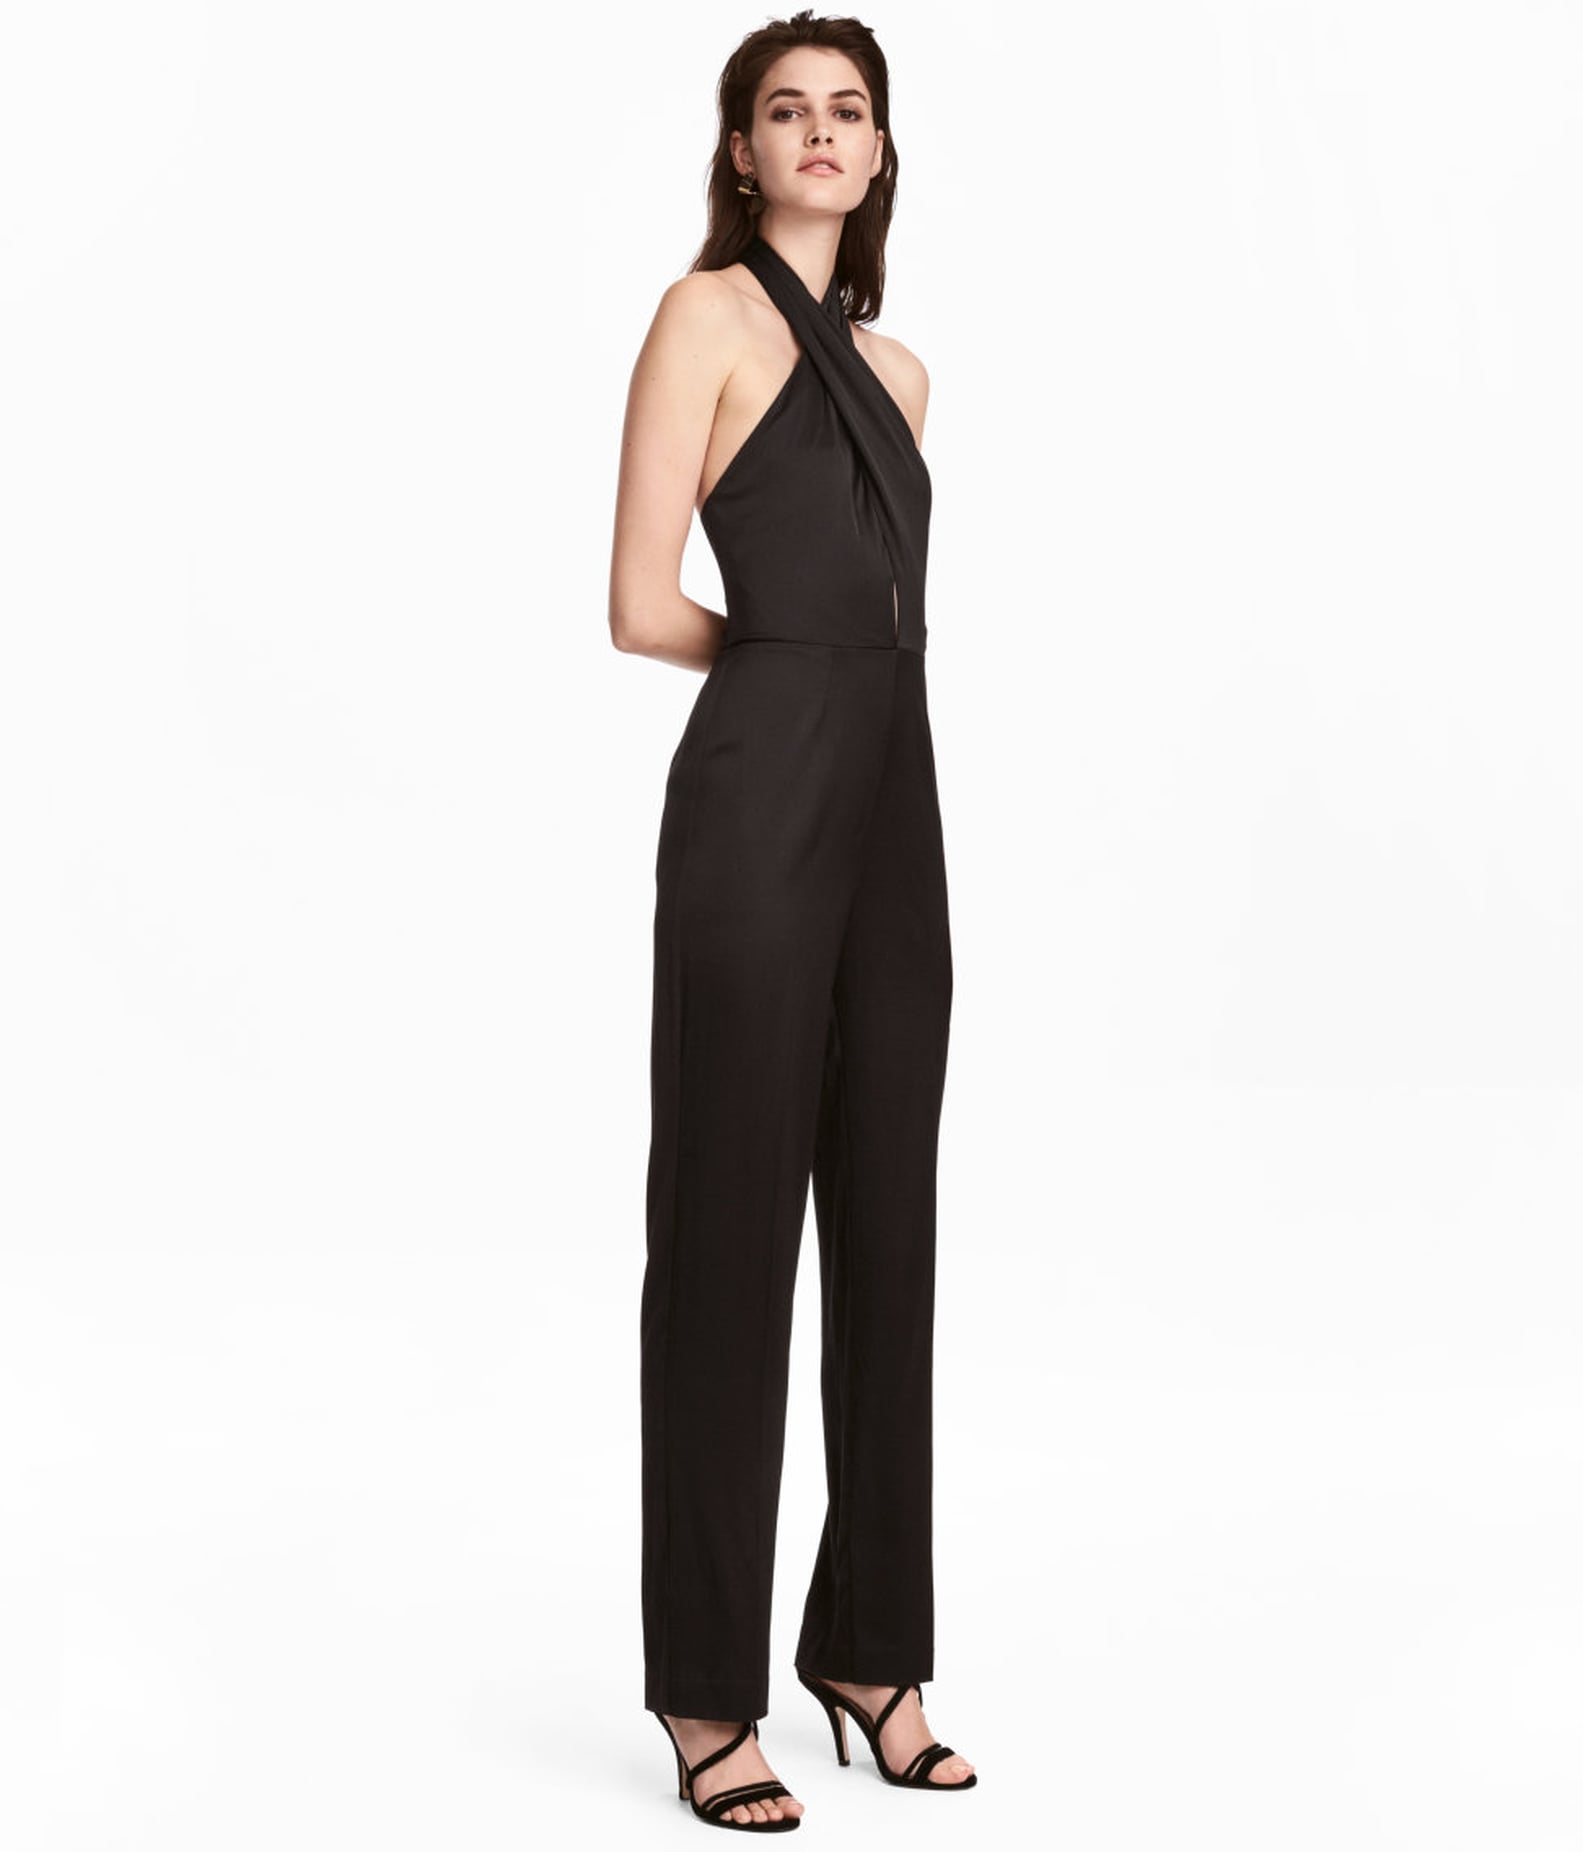 Cute Jumpsuits For Holiday Parties | POPSUGAR Fashion